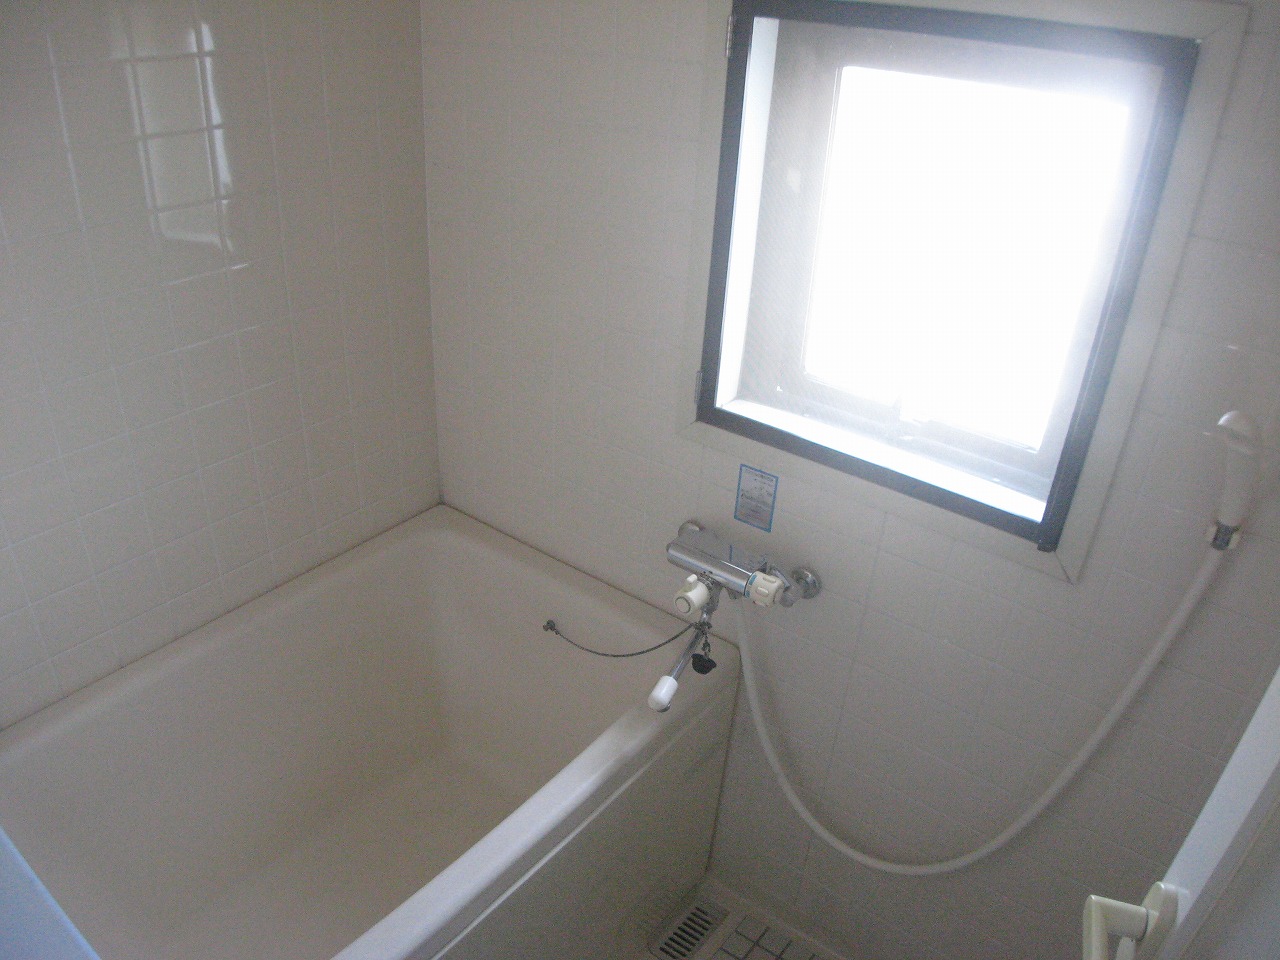 Bath. It comes with a window in bathroom, This is useful to arouse